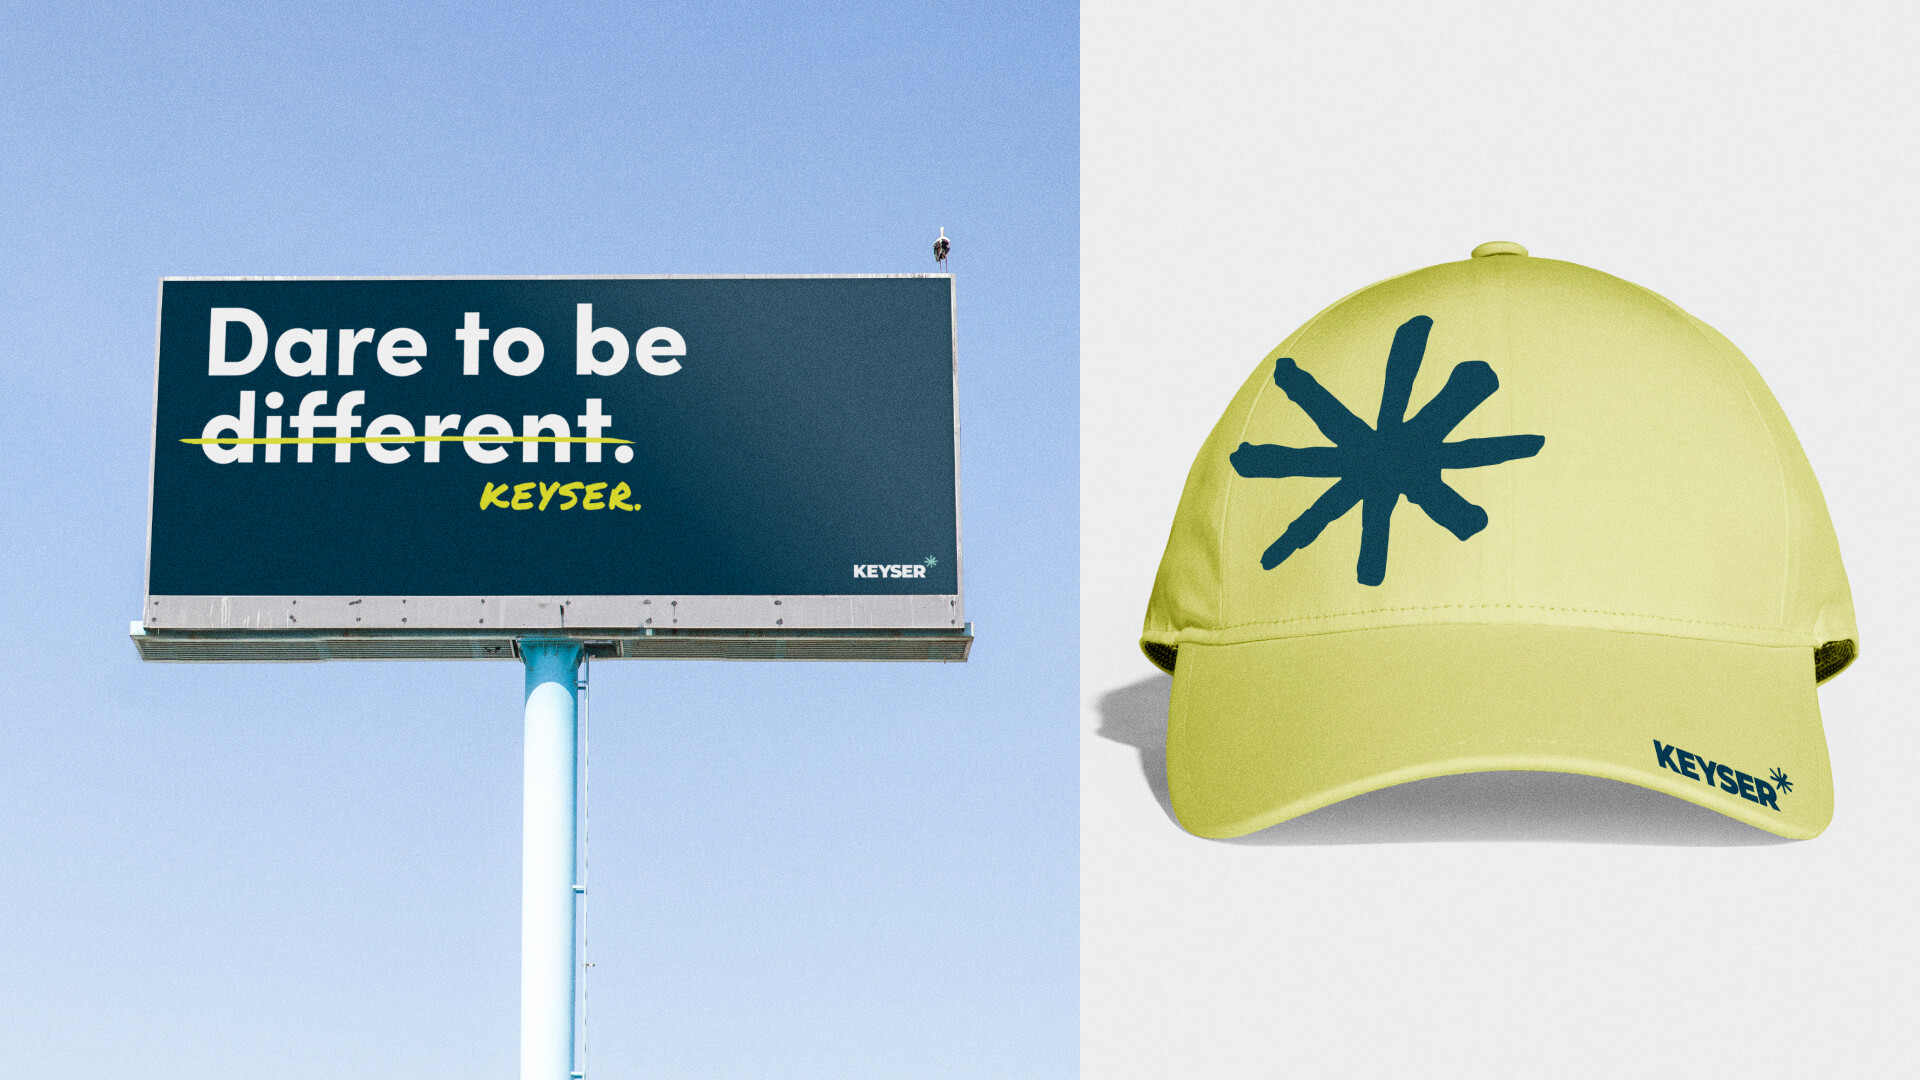 Billboard that says, "Dare to be different. Keyser." Different is crossed out and replaced with Keyser. Yellow baseball cap image on the right that has the Keyser asterisk brand on.